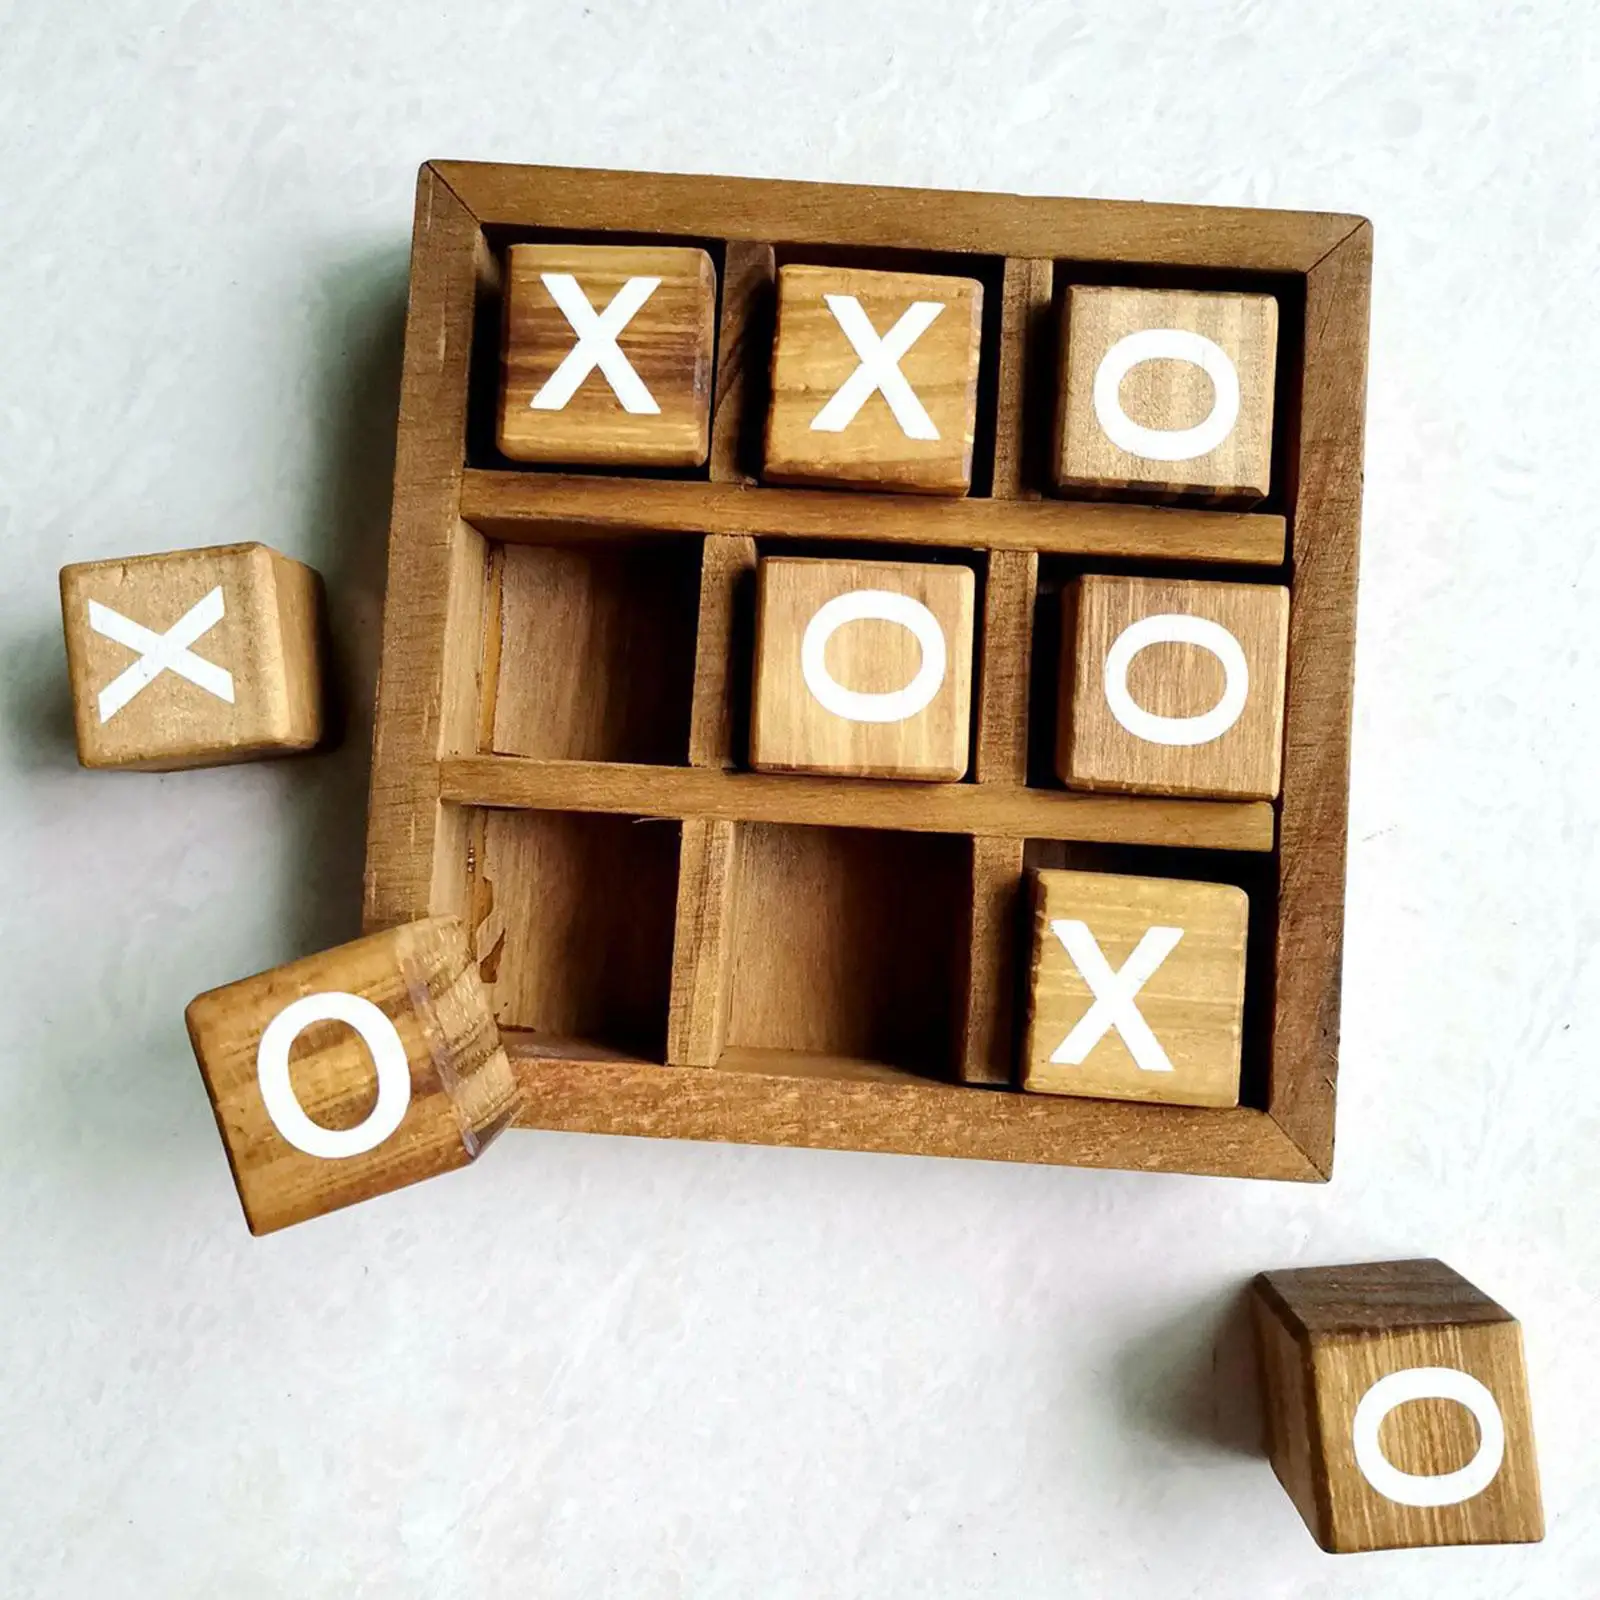 Wooden Tic TAC Toe Game Strategy Board Games Party Favor Fun Indoor Brain Teaser Travel for Home Adults Friends Decor